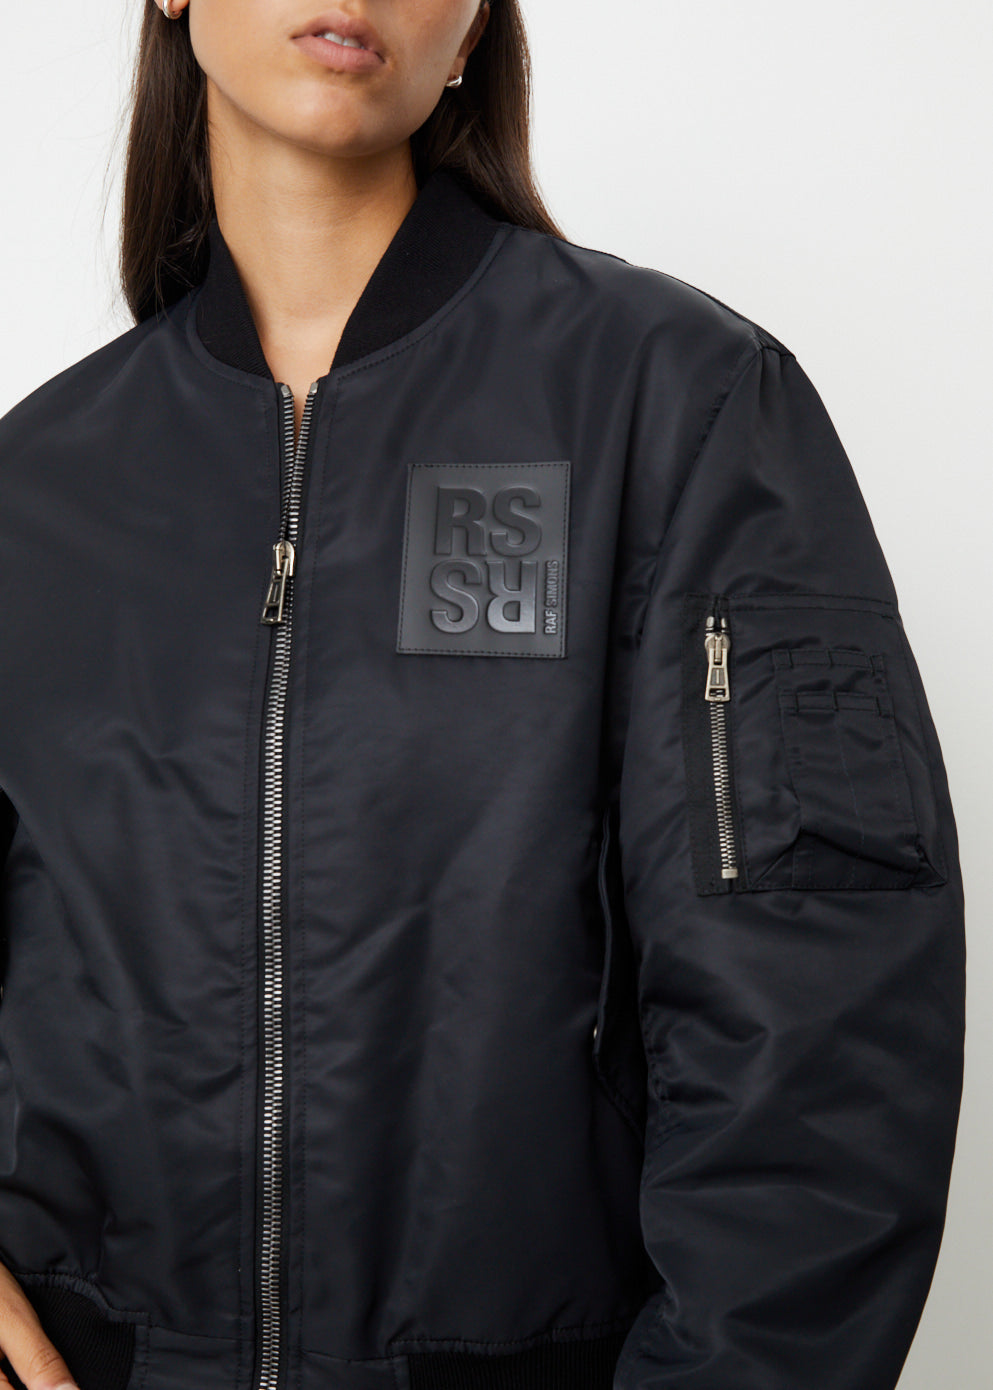 SIMPLY COMPLICATED　CGN BOMBER JACKET身幅68cm